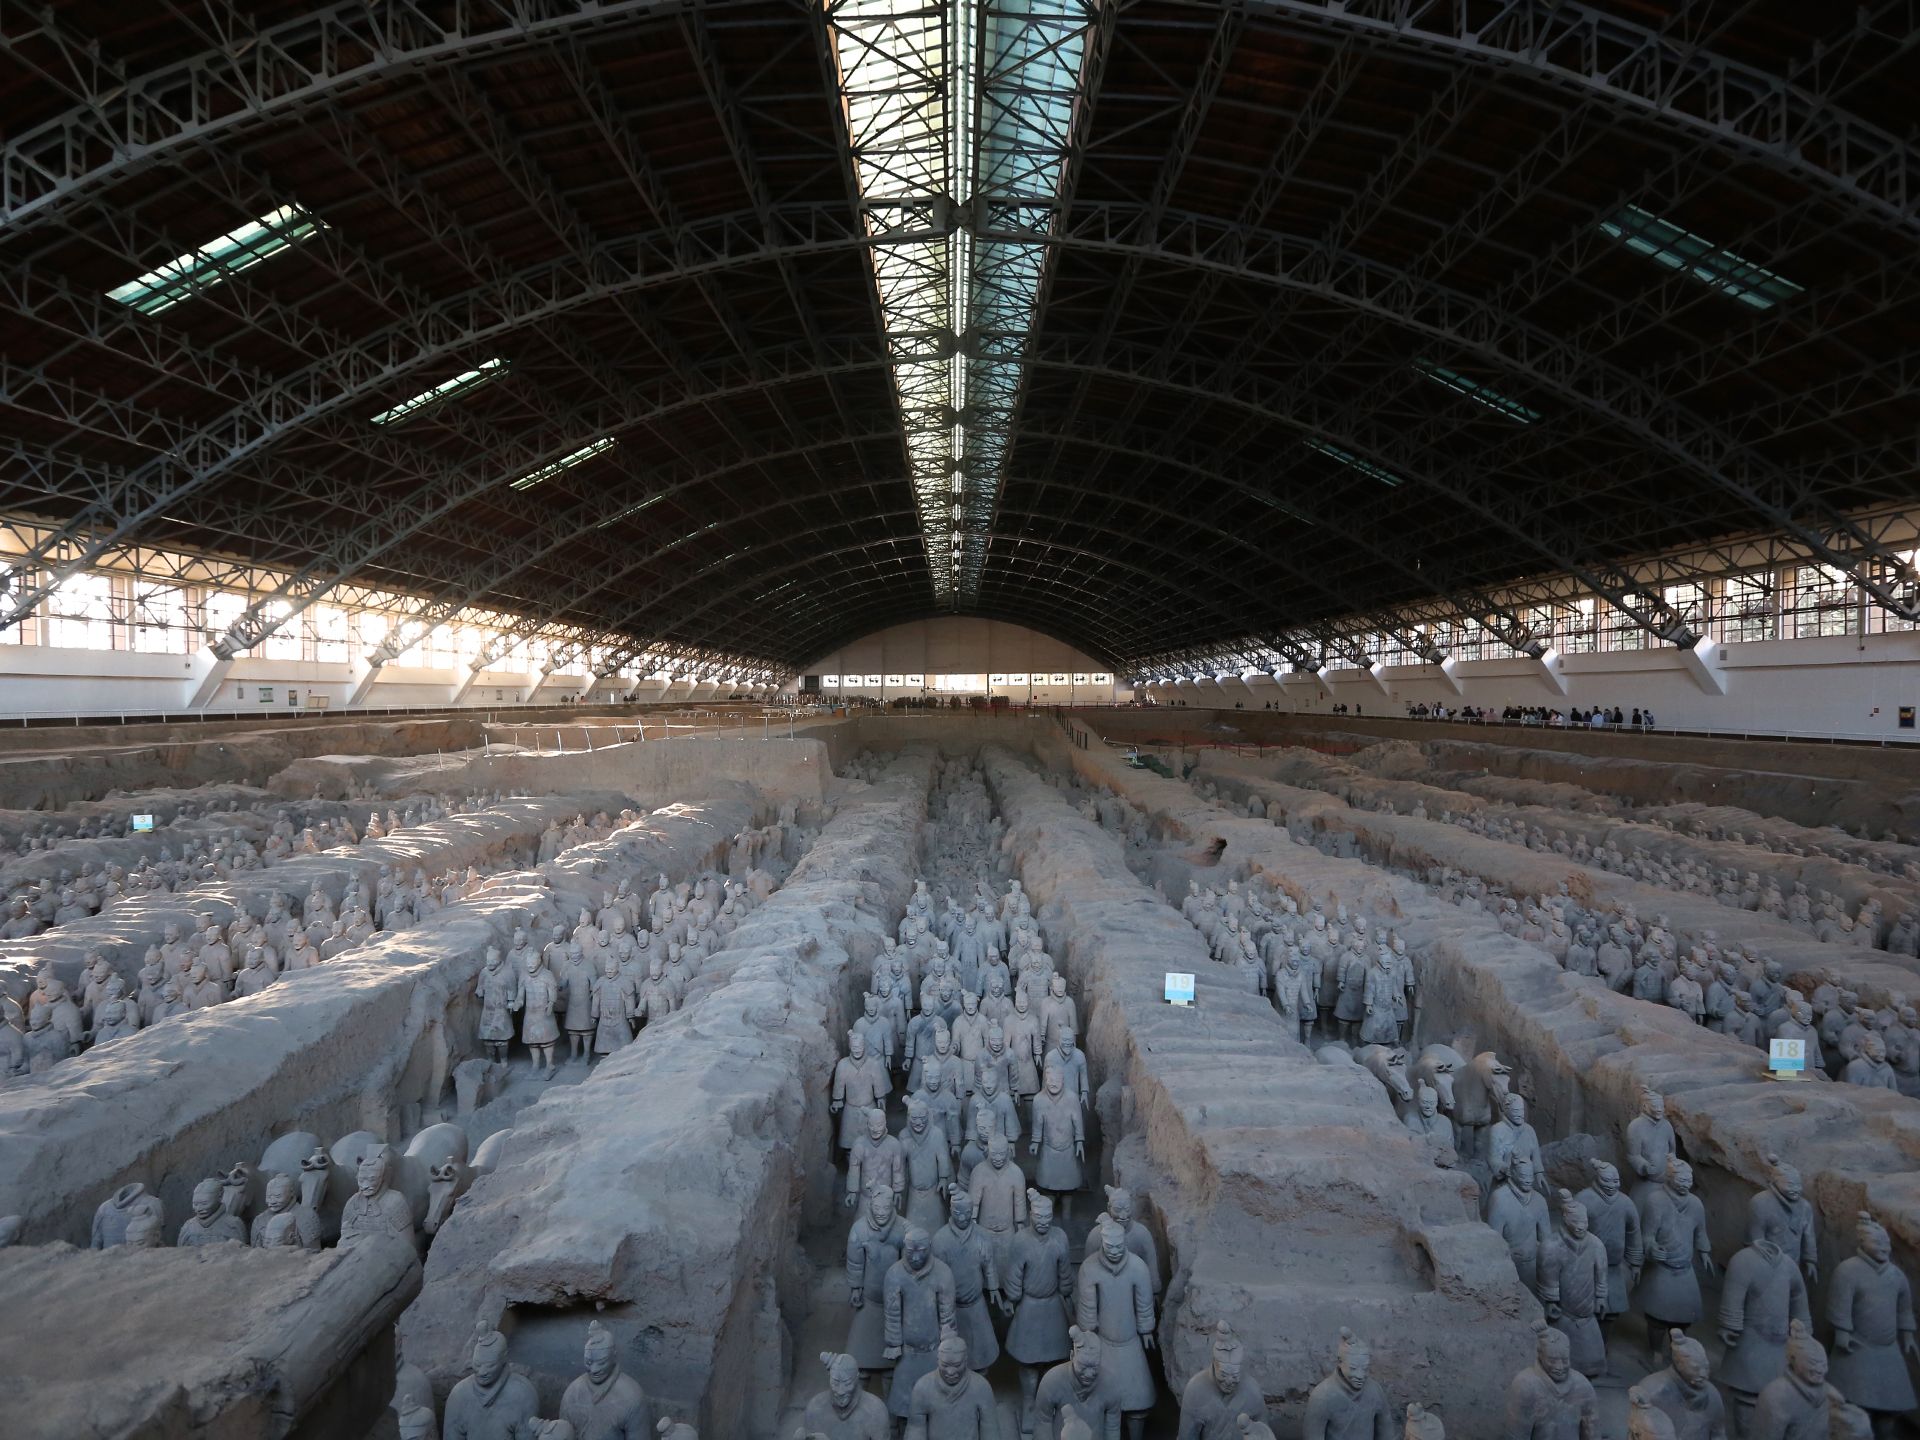 Terracotta Army: Guardians of the First Emperor's tomb march to Cincinnati